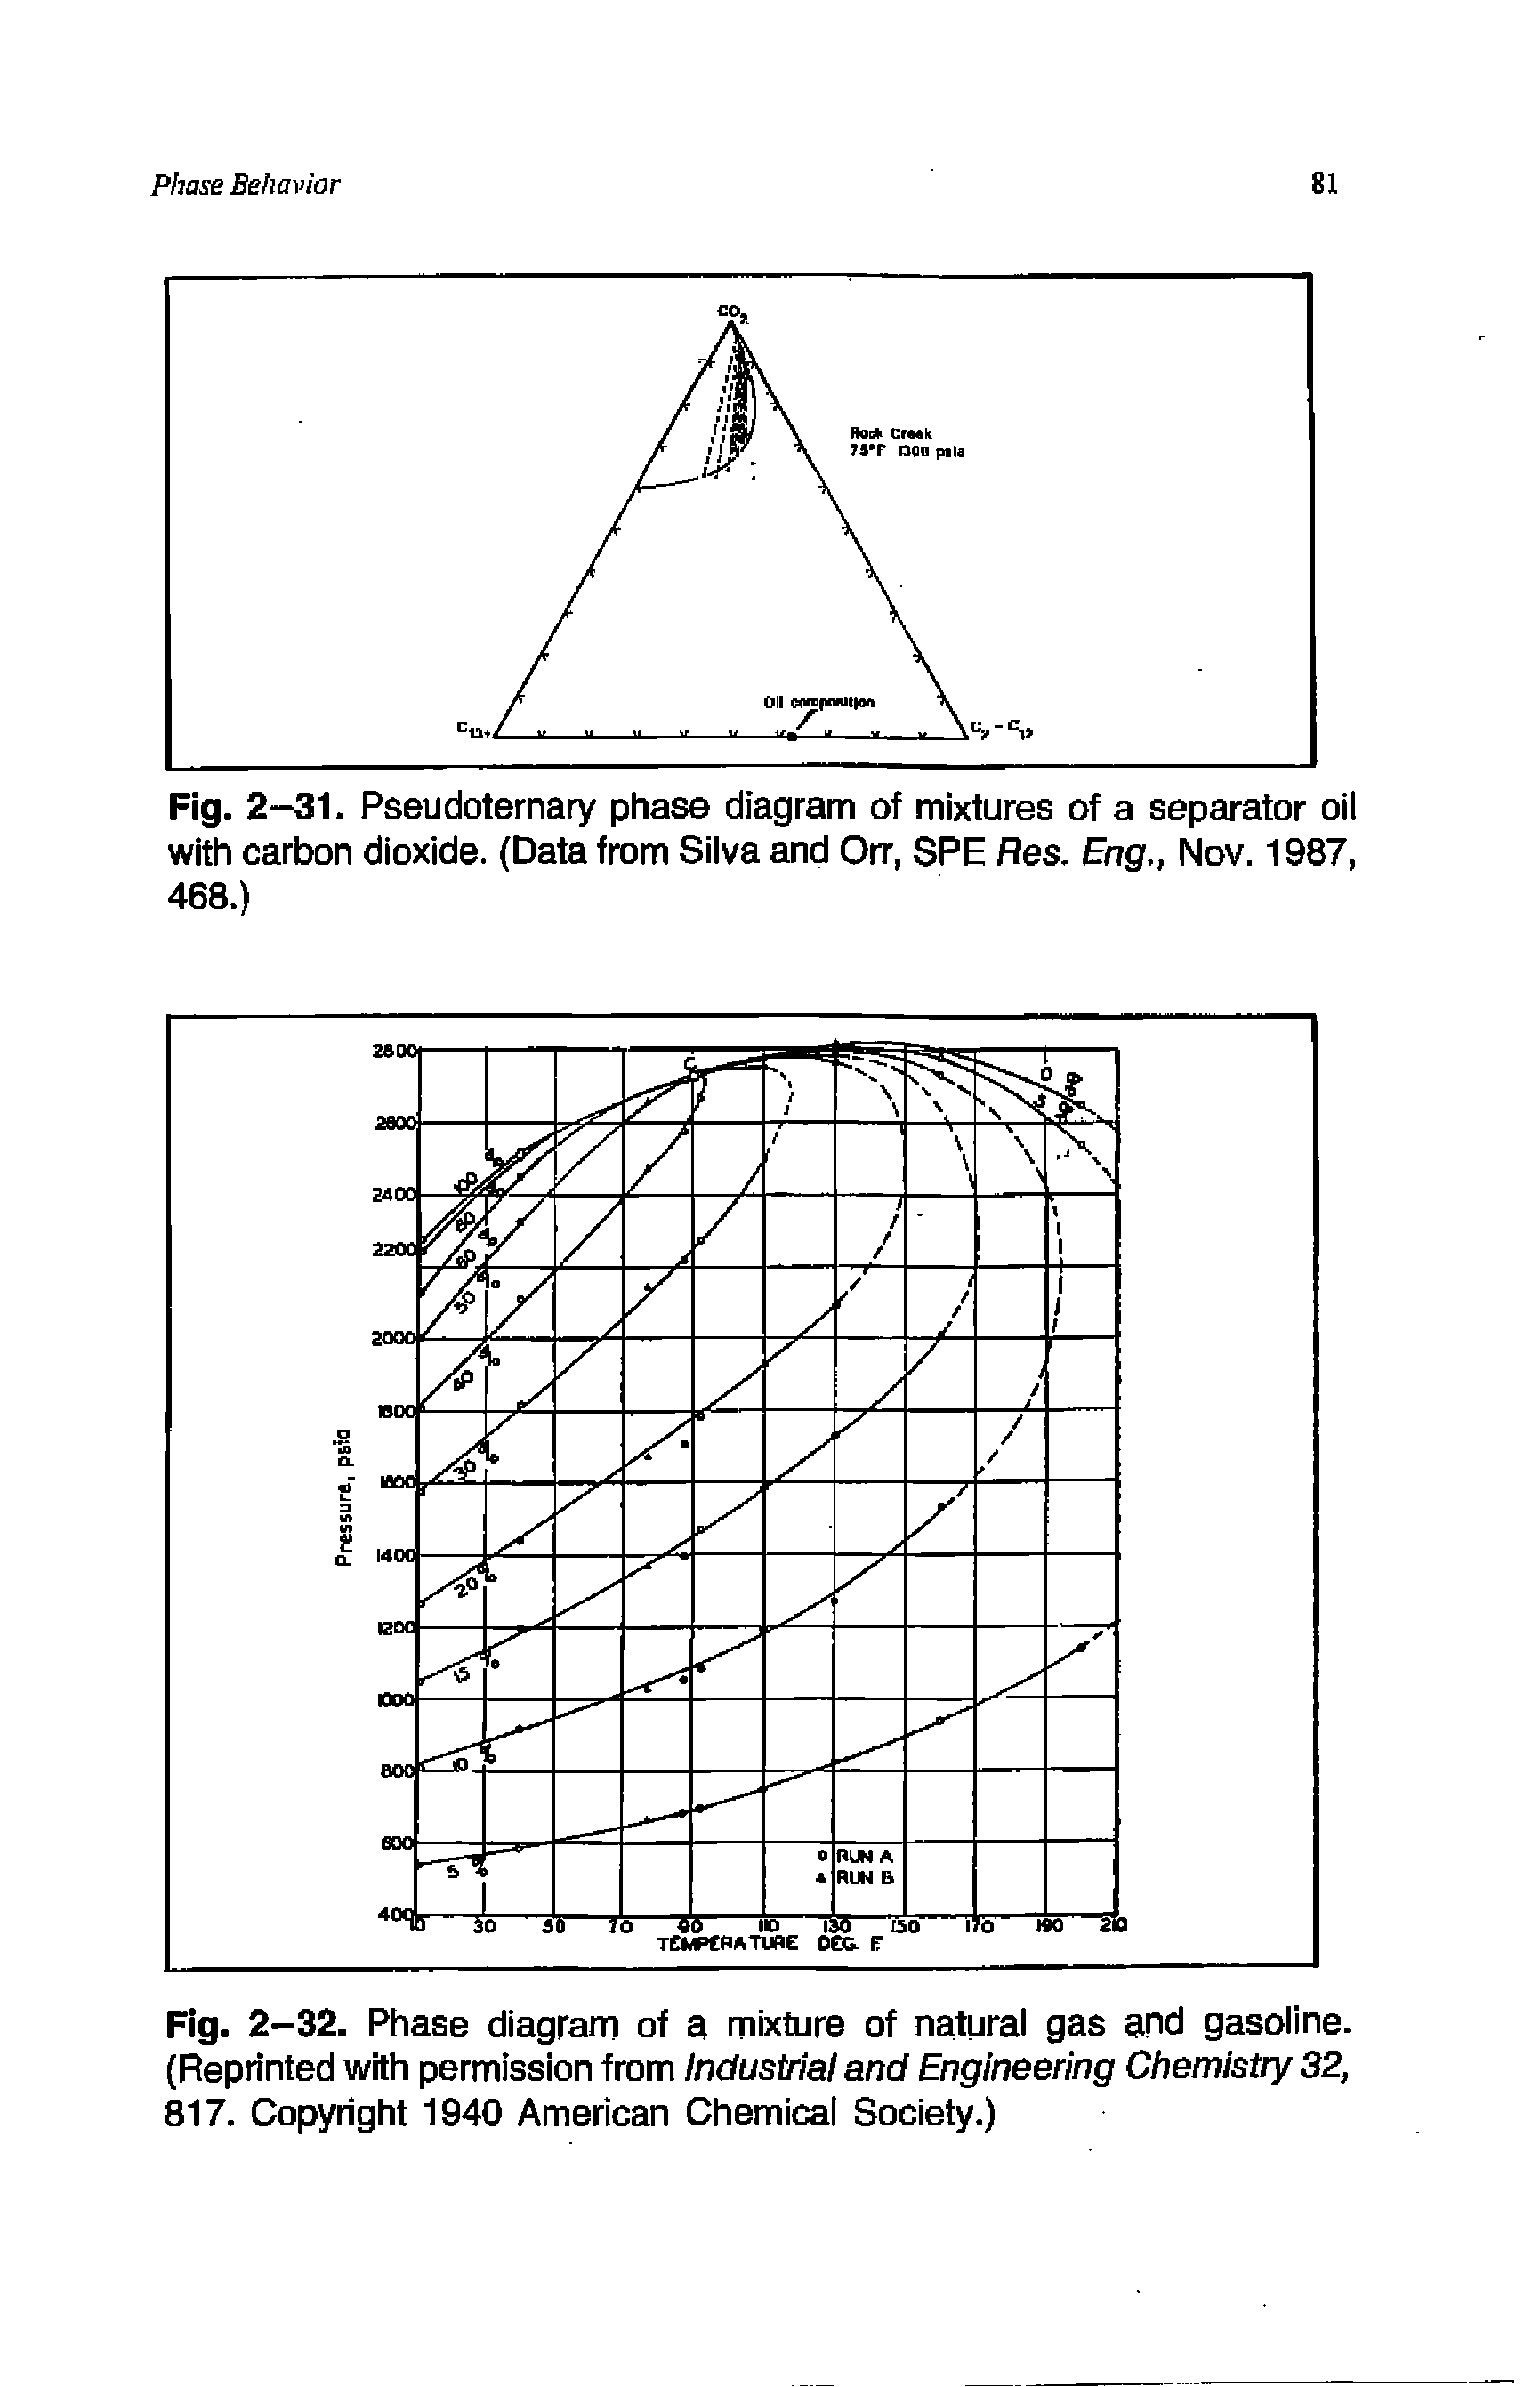 Fig. 2-31. Pseudoternary phase diagram of mixtures of a separator oil with carbon dioxide. (Data from Silva and Orr, SPE Res. Eng., Nov. 1987, 468.)...